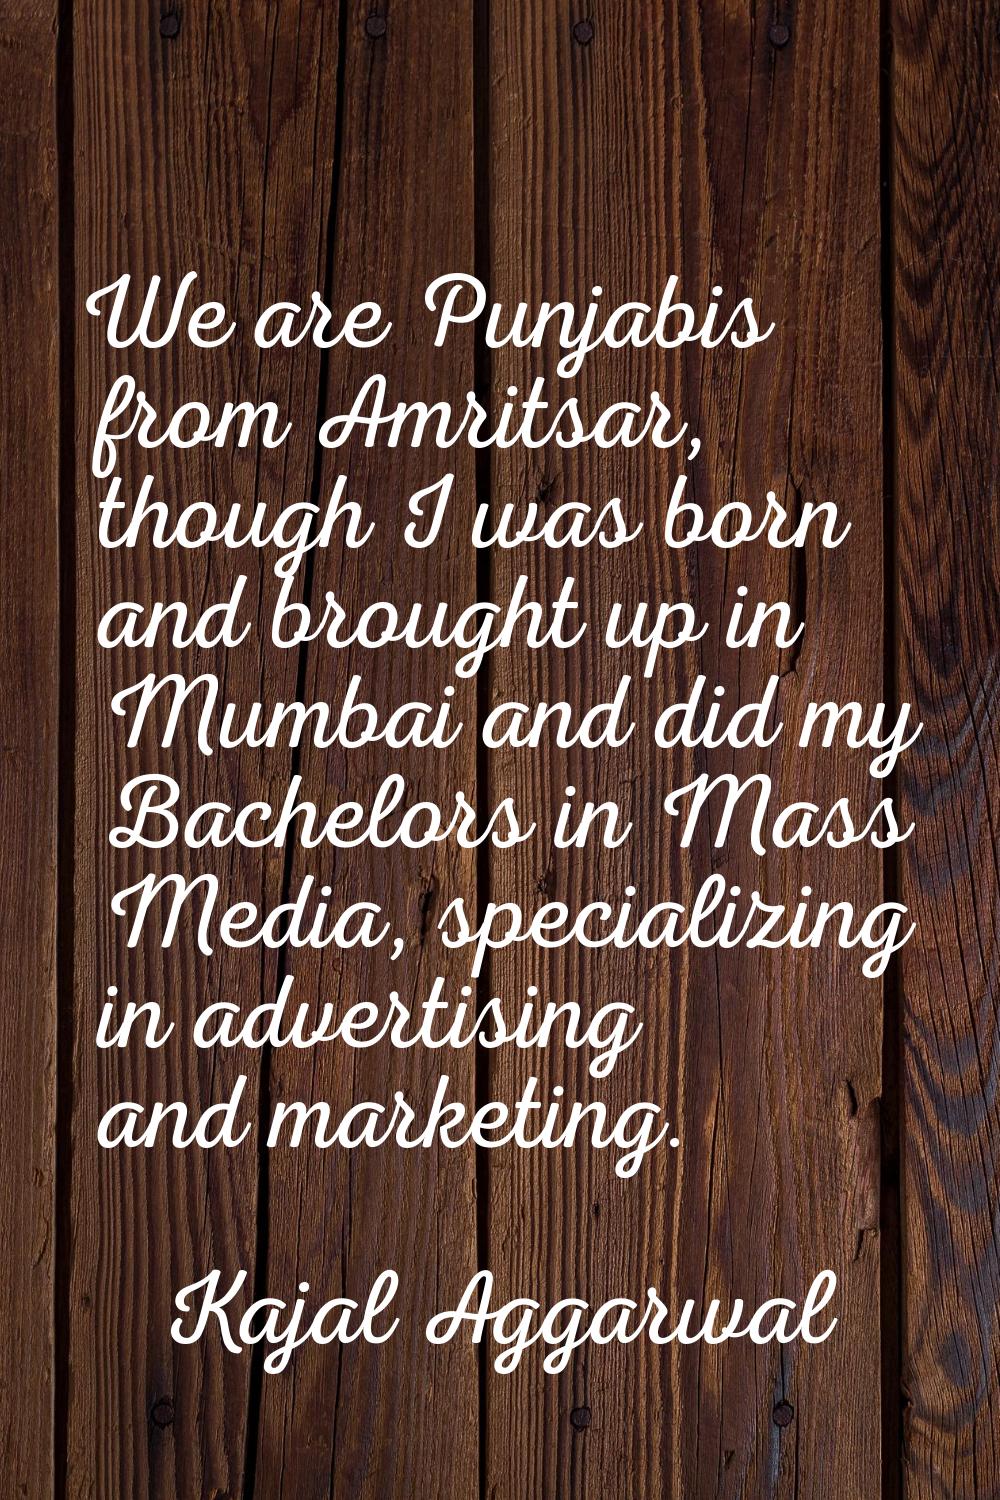 We are Punjabis from Amritsar, though I was born and brought up in Mumbai and did my Bachelors in M